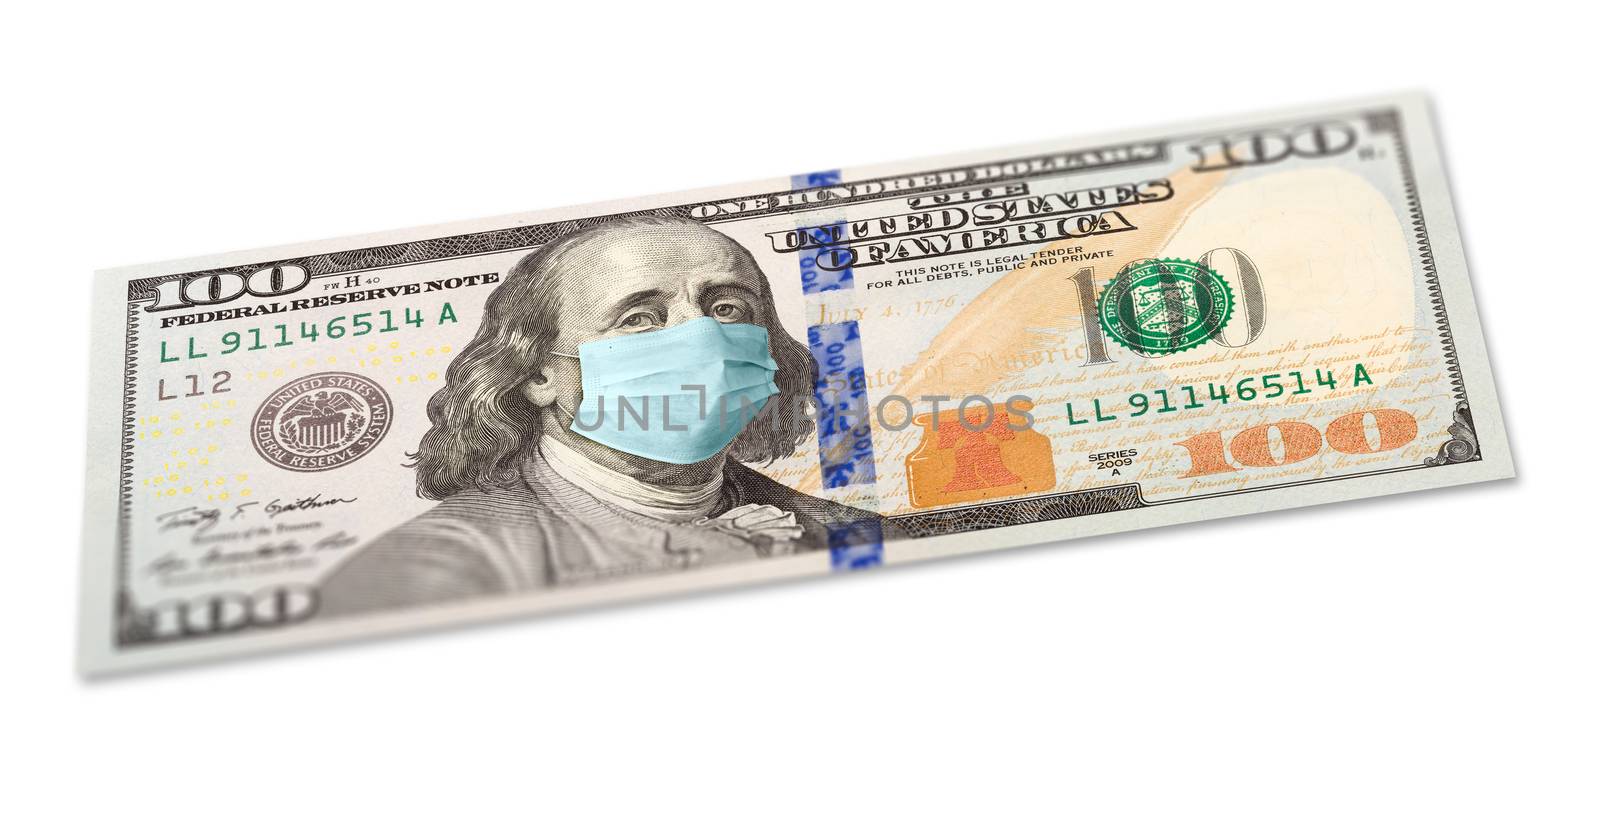 Full 100 Dollar Bill With Concerned Expression Wearing Medical Face Mask on White. by Feverpitched